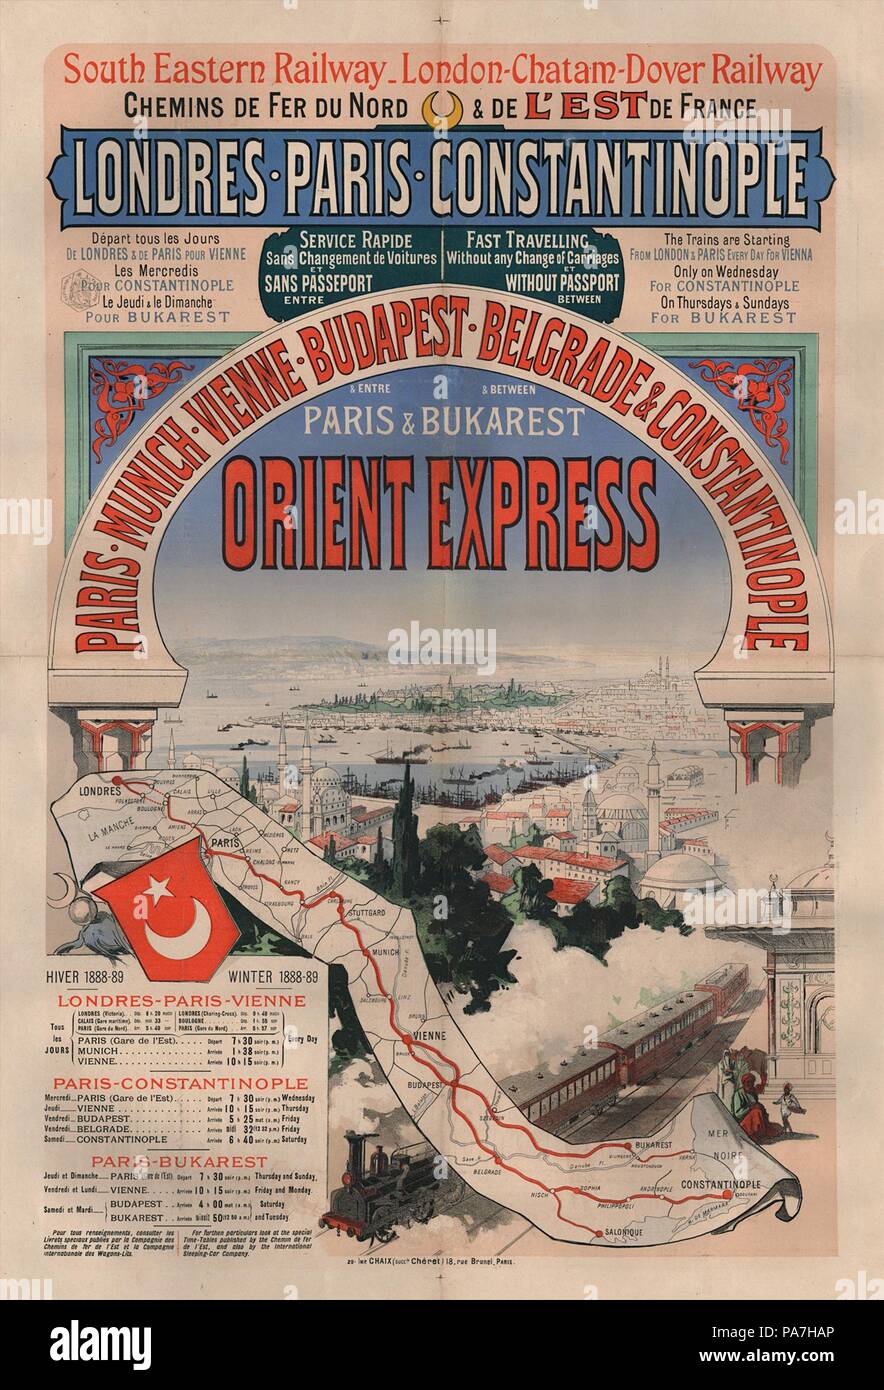 Poster advertising the Orient Express. Museum: PRIVATE COLLECTION. Stock Photo